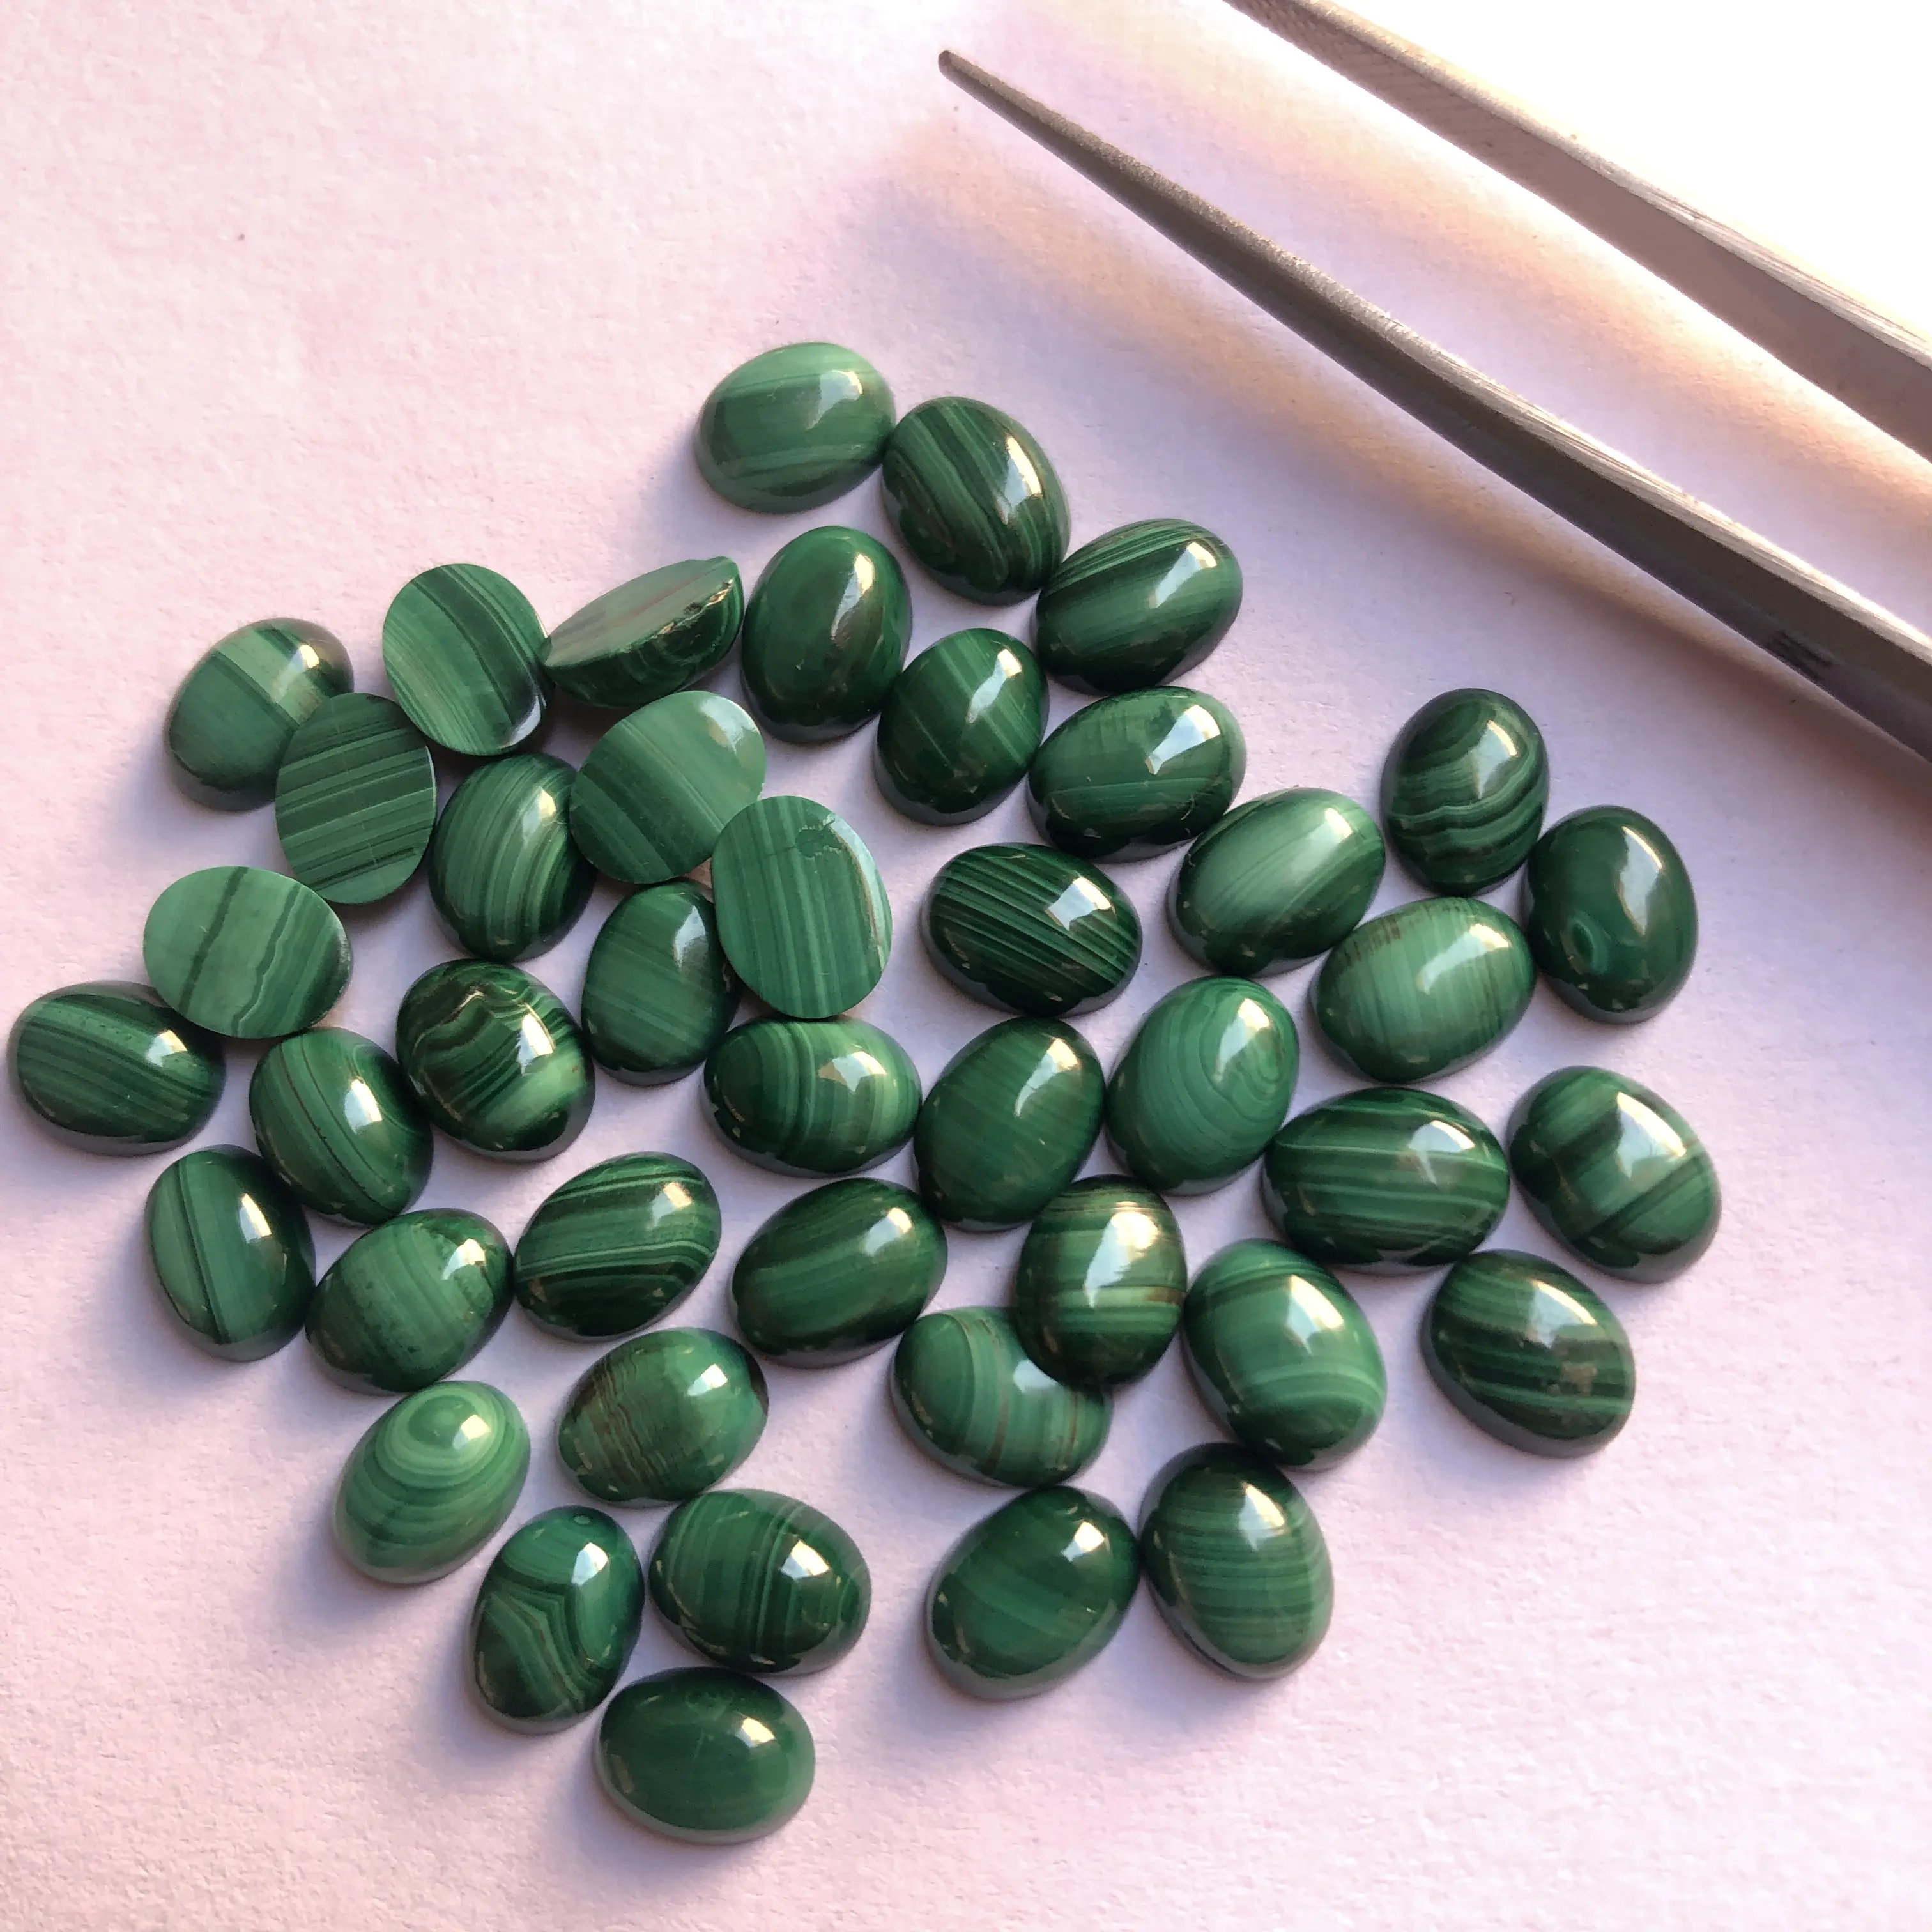 Natural Malachite Oval Smooth Loose Calibrated Size Cabochon at Wholesale Factory Price From Manufacturer Suppliers Buy Online